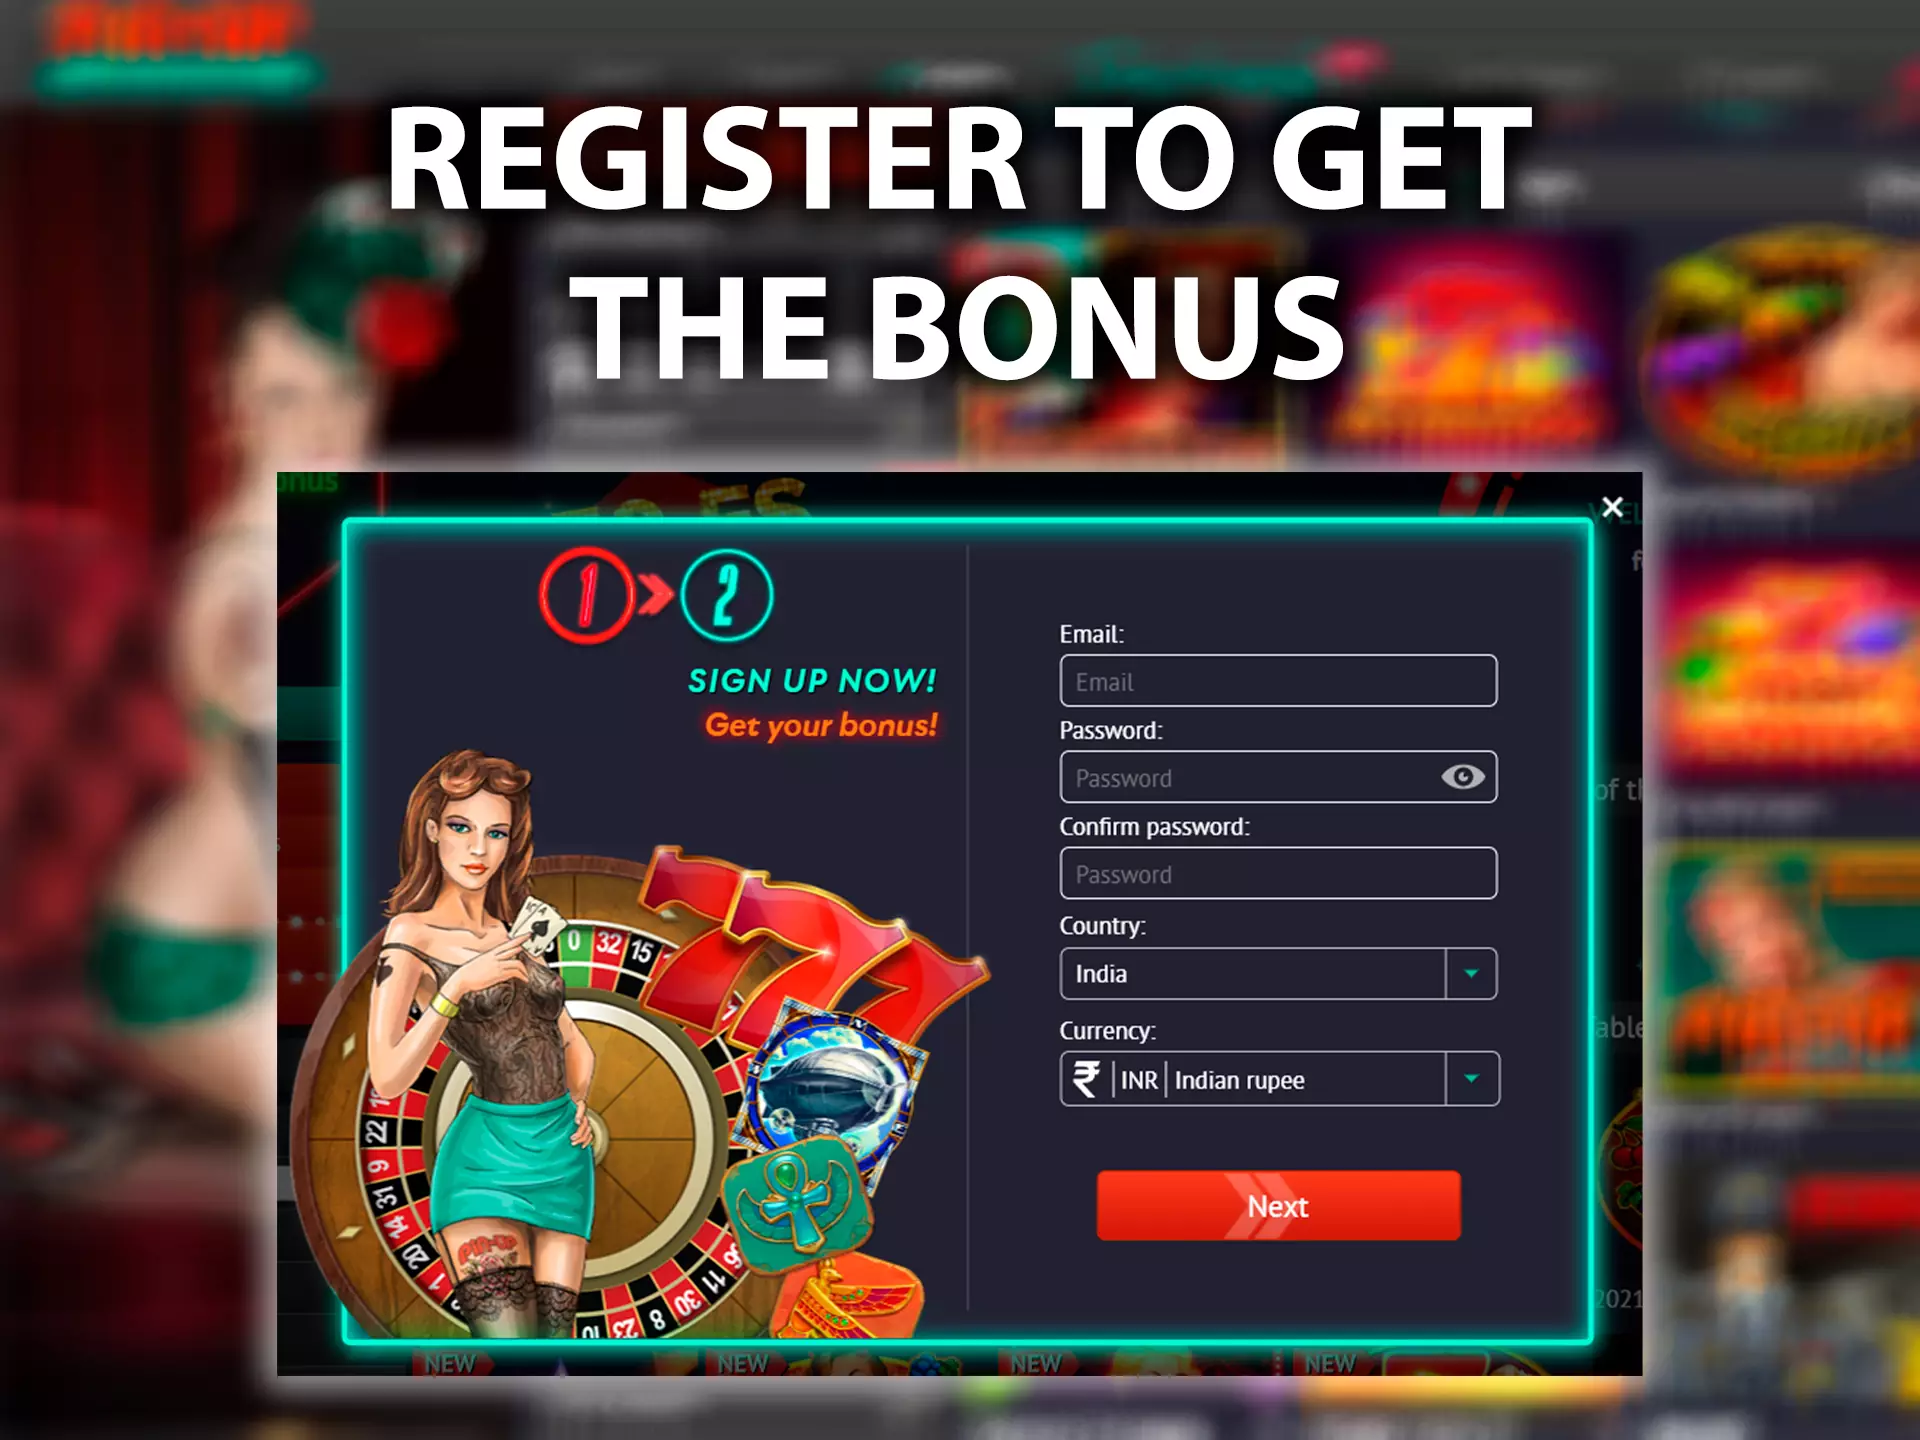 Sign up for Pin-Up Casino, make a deposit and get the bonus.